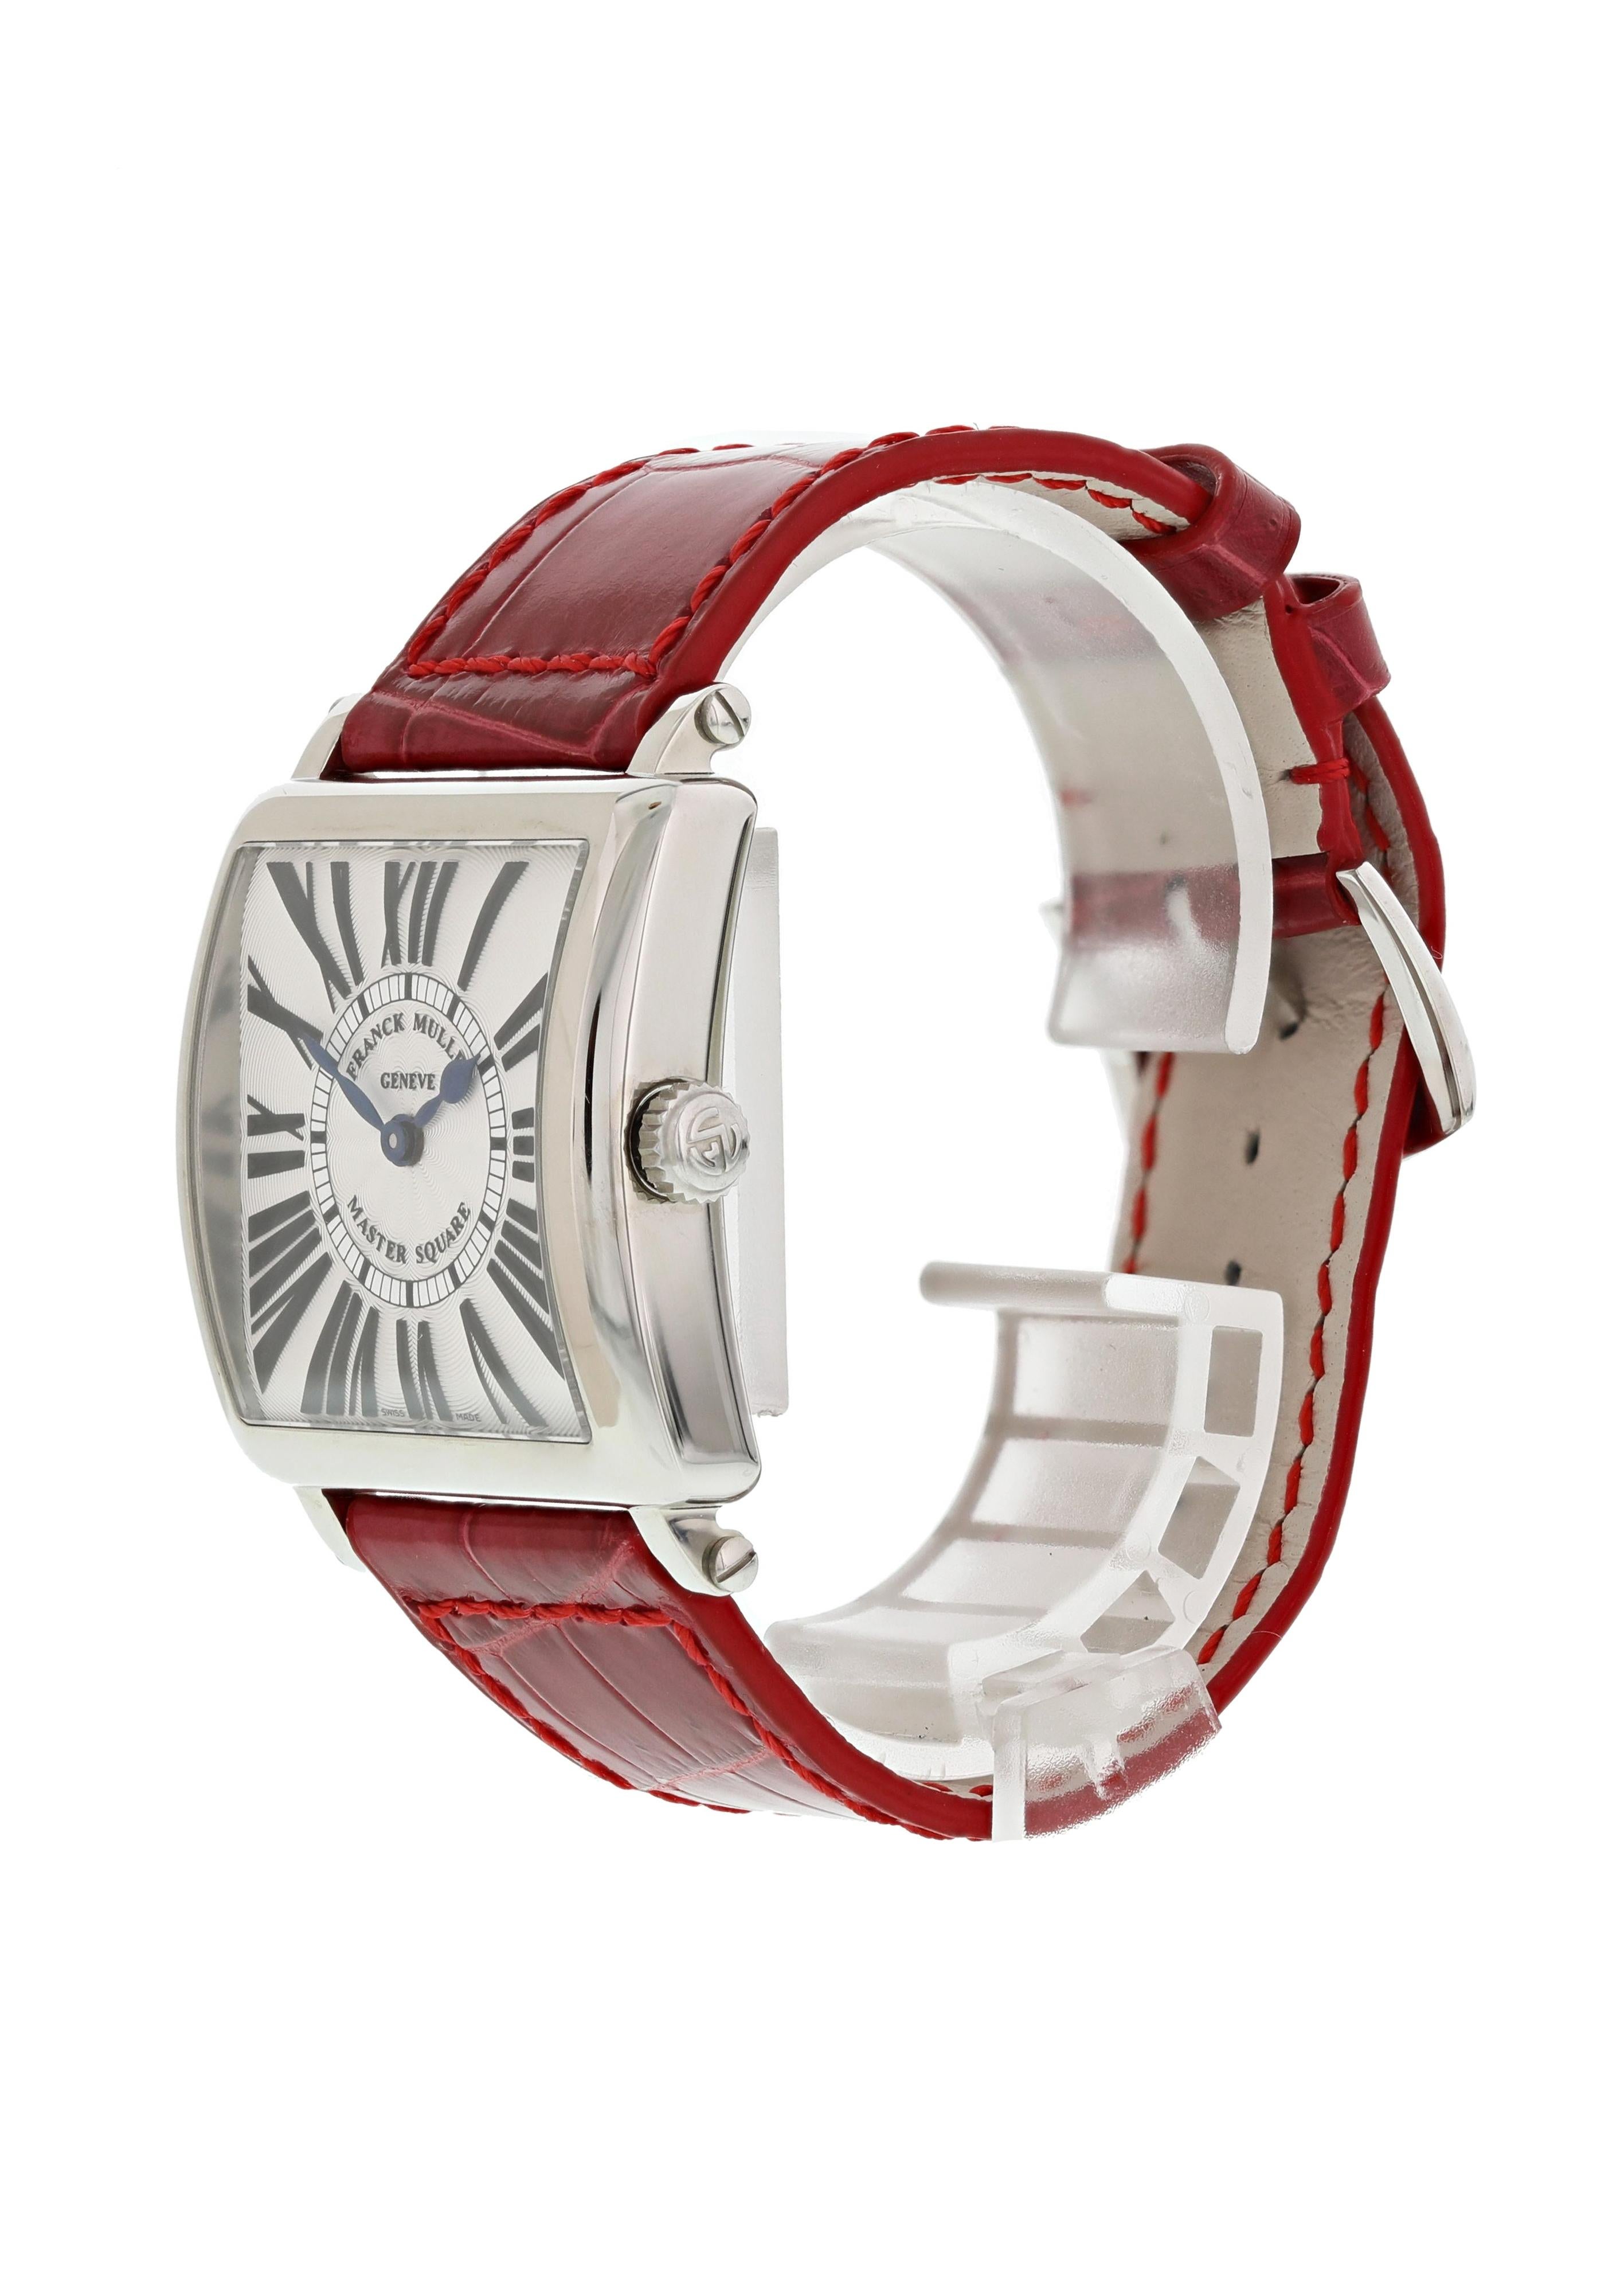 Franck Muller Master Square 2534 Mens Watch. 32.7mm stainless steel case with a smooth bezel. Silver dial with blue steel hands. Black Roman numeral hour markers. Minute marker on the inner dial. Red alligator leather strap with stainless steel